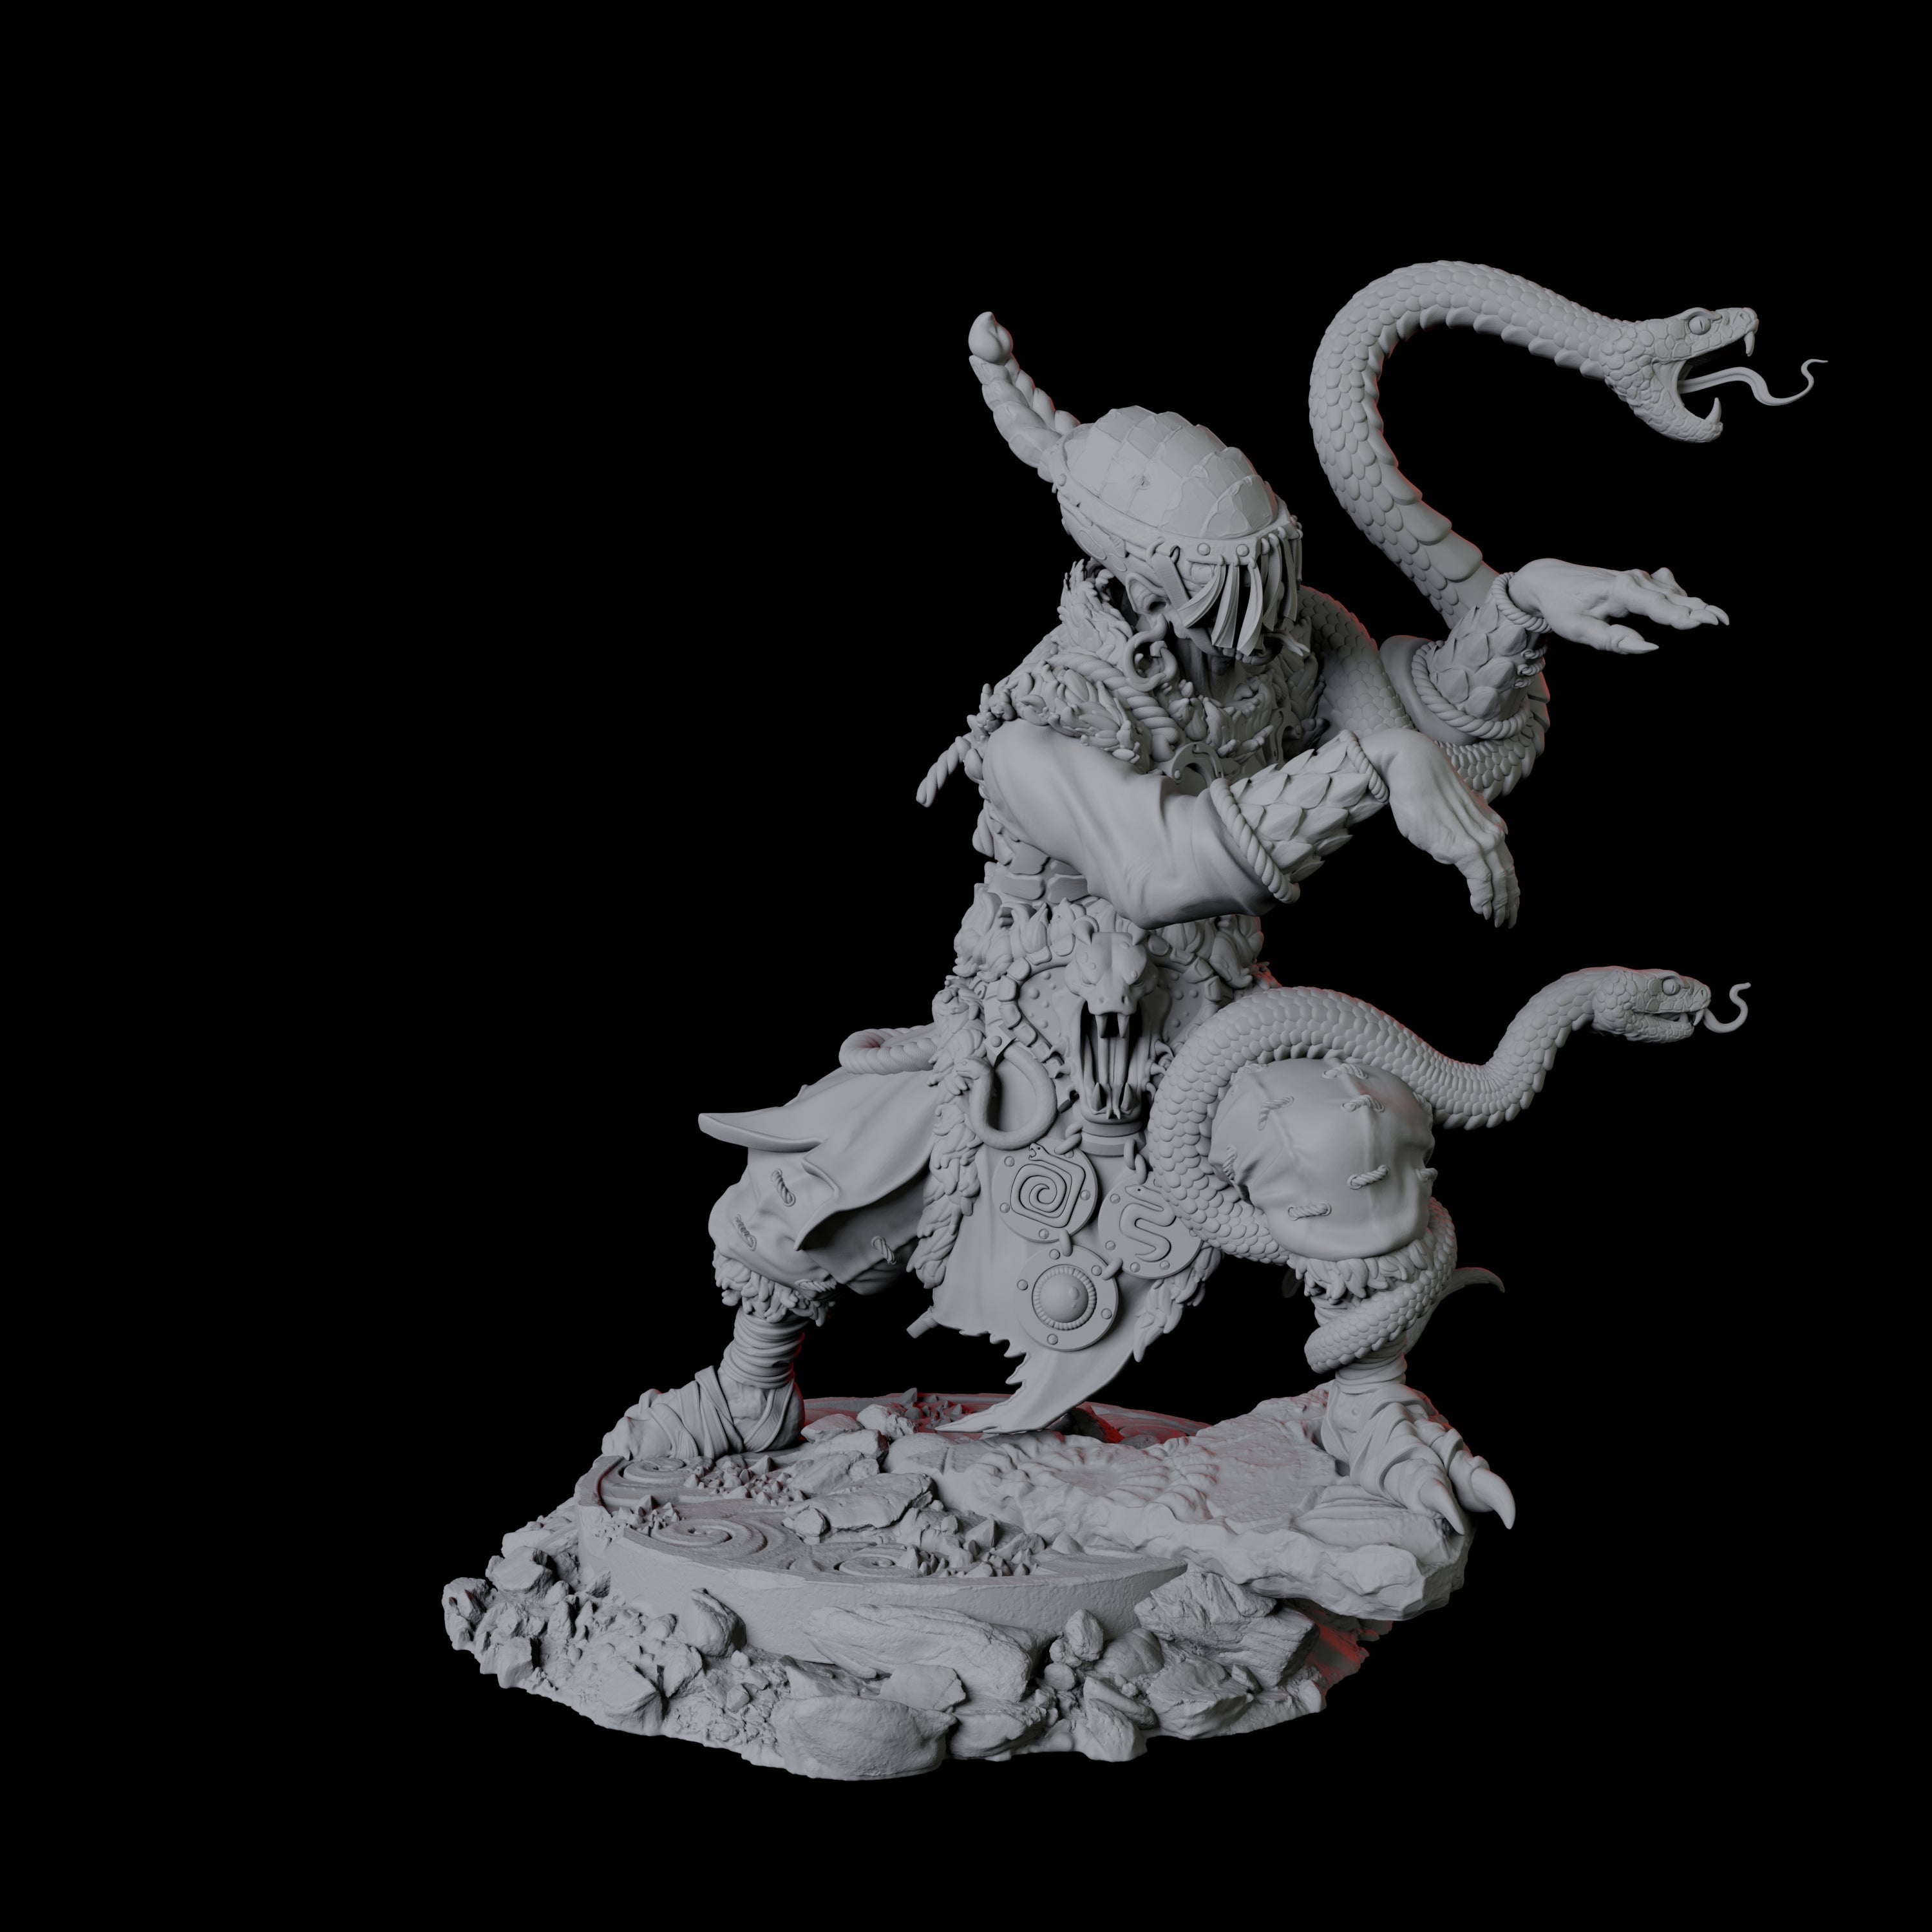 Four Yuan-Ti Snake Charmers Miniature for Dungeons and Dragons, Pathfinder or other TTRPGs